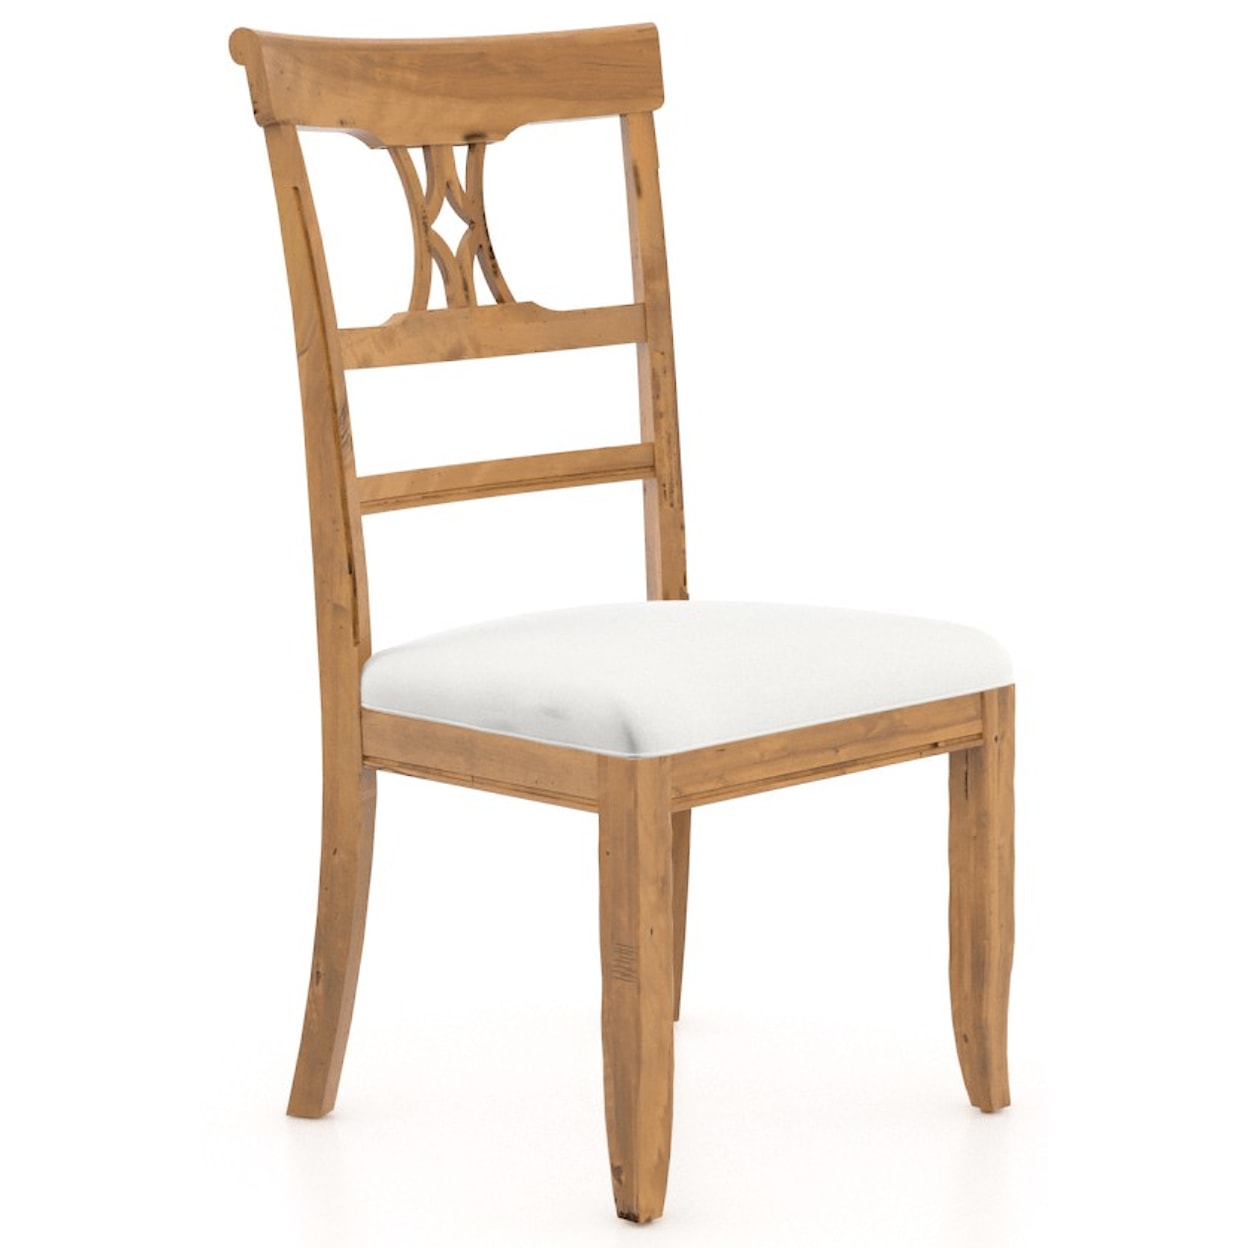 Canadel Champlain Customizable Dining Side Chair